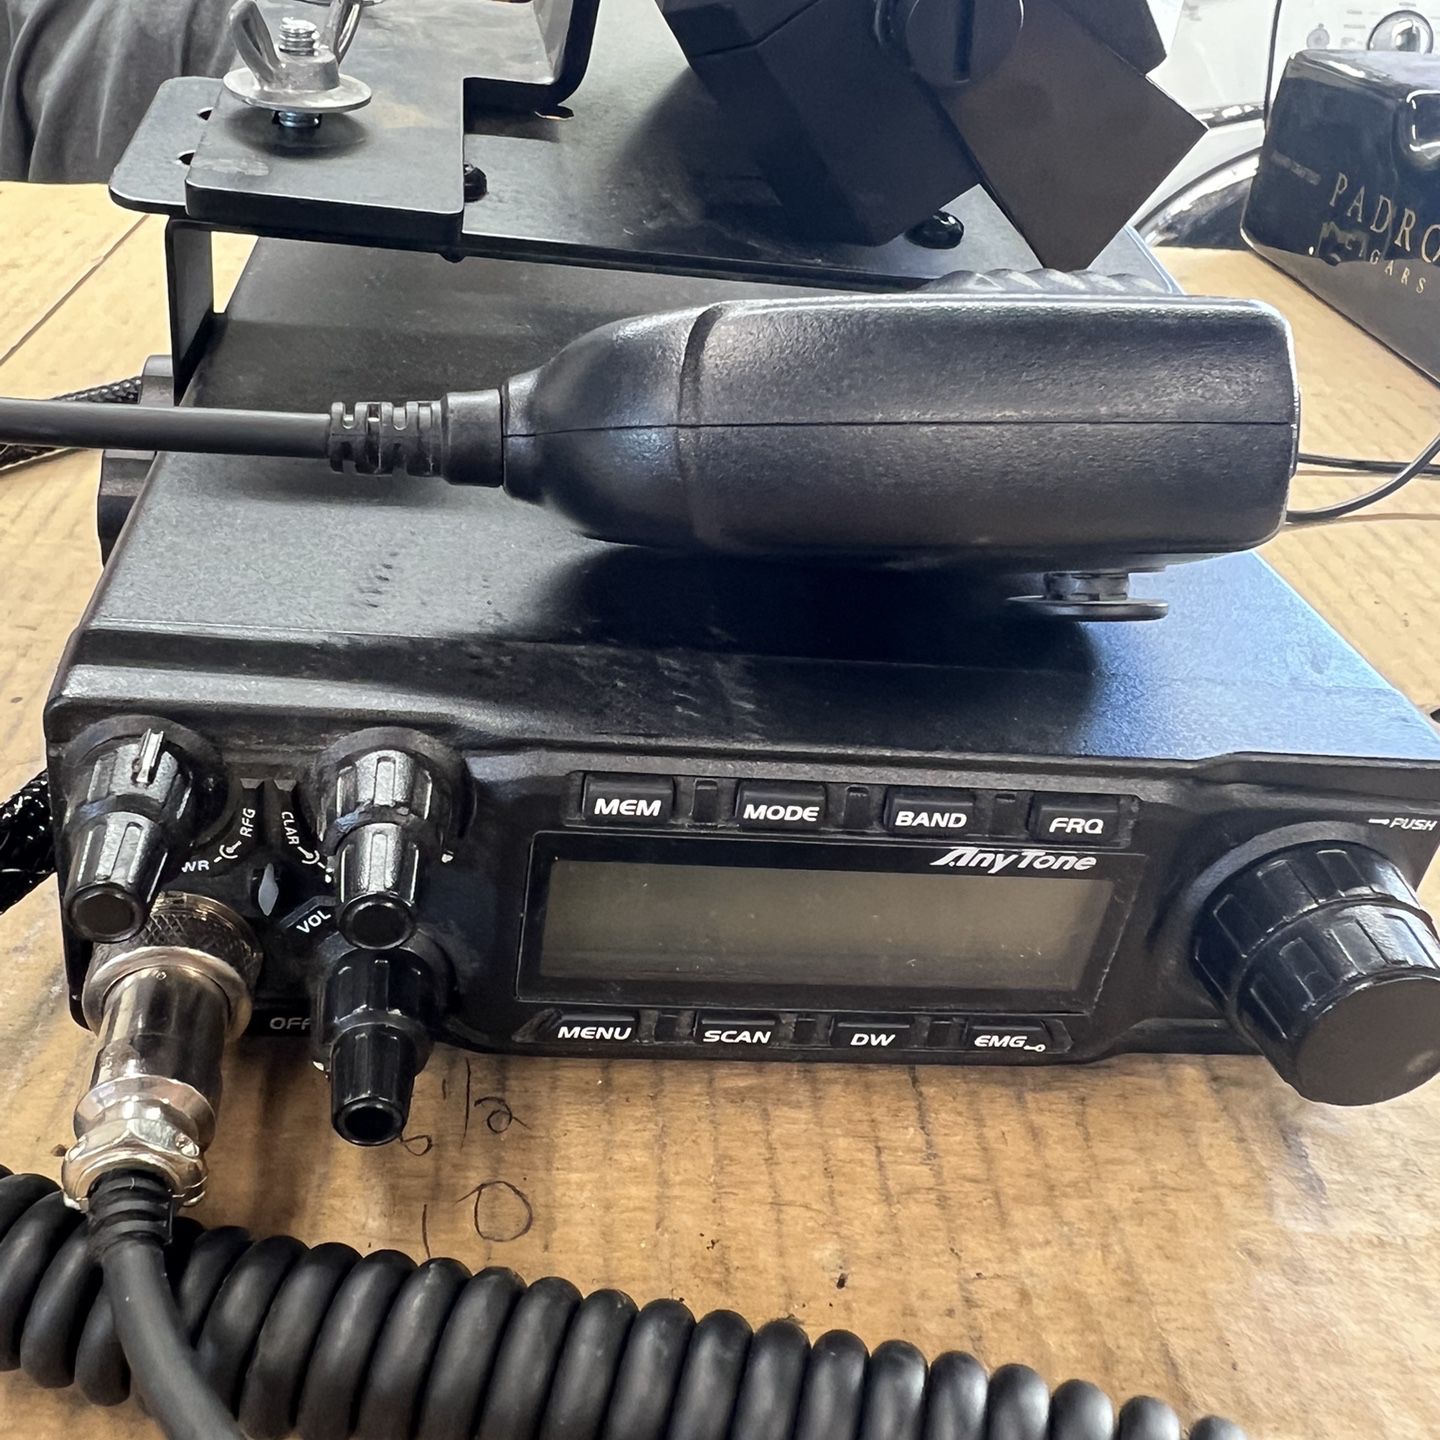 AnyTone AT-6666 10 Meter Radio CB Radio for Sale in West Covina, CA  OfferUp